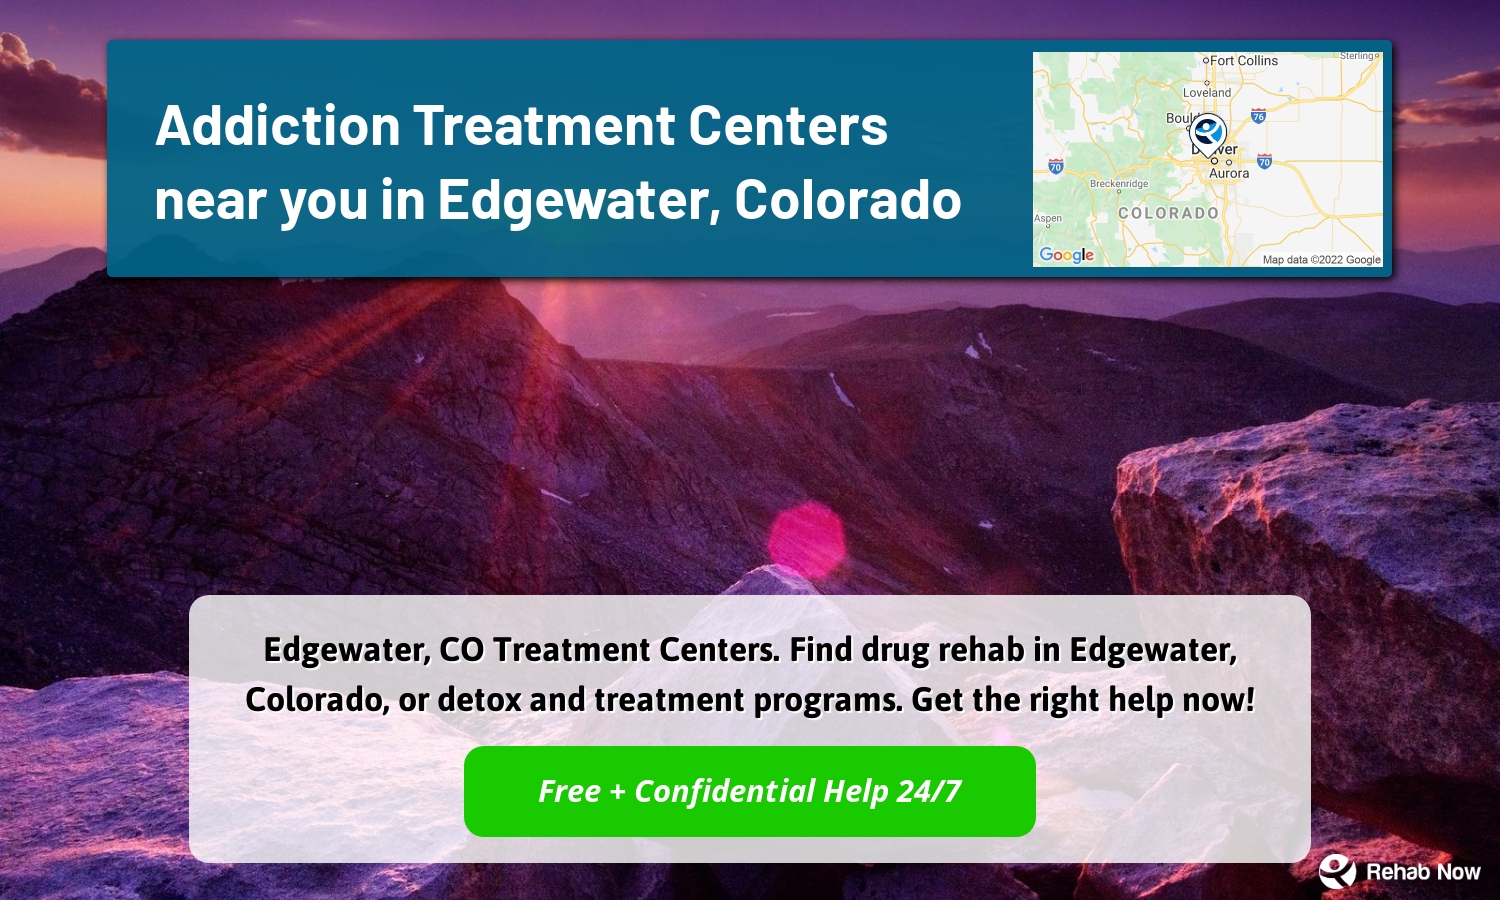 Edgewater, CO Treatment Centers. Find drug rehab in Edgewater, Colorado, or detox and treatment programs. Get the right help now!